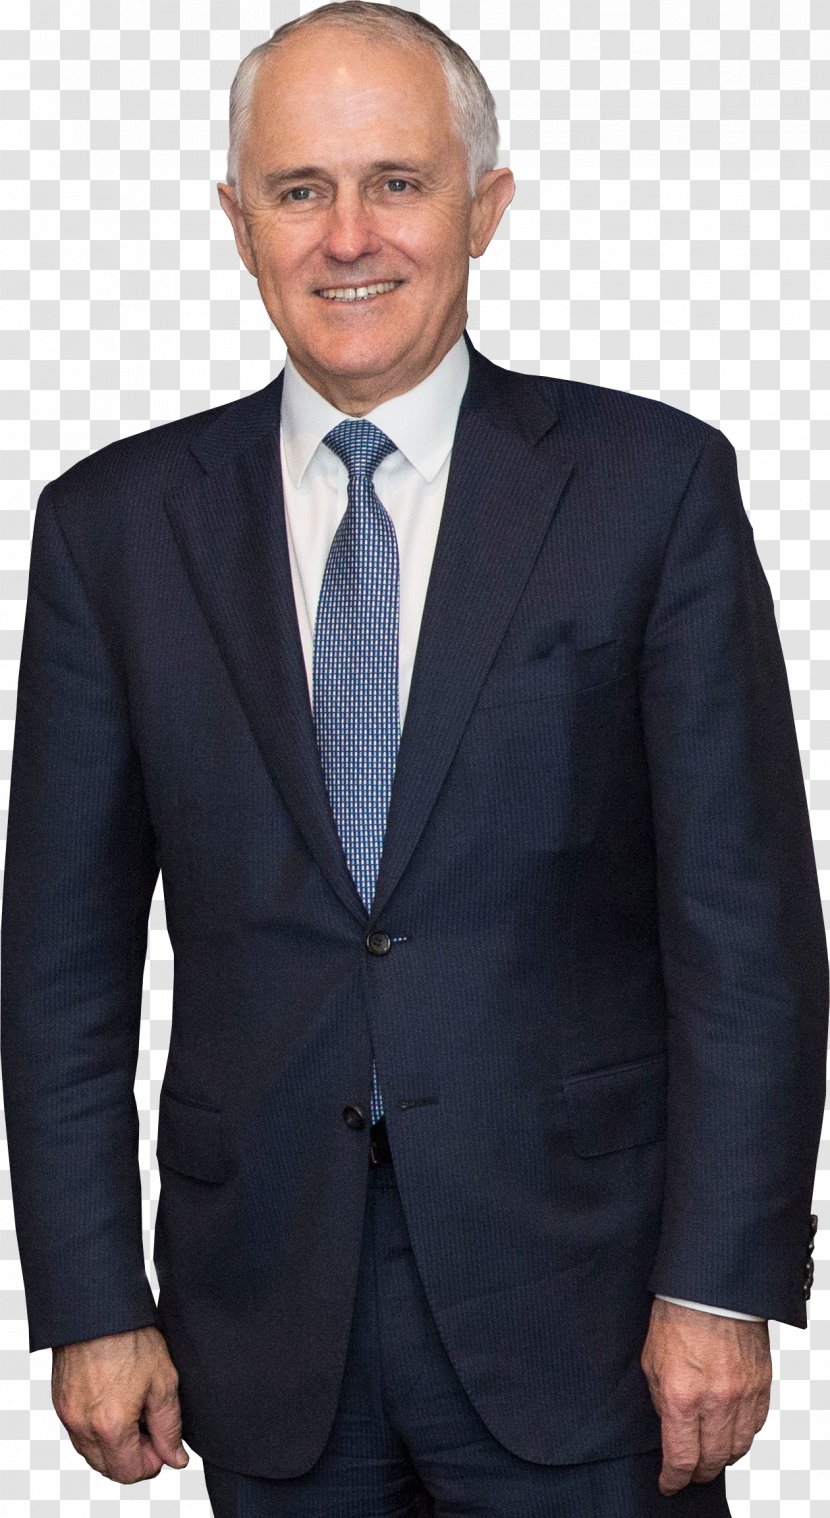 Malcolm Turnbull Hotel Manager - White Collar Worker Transparent PNG